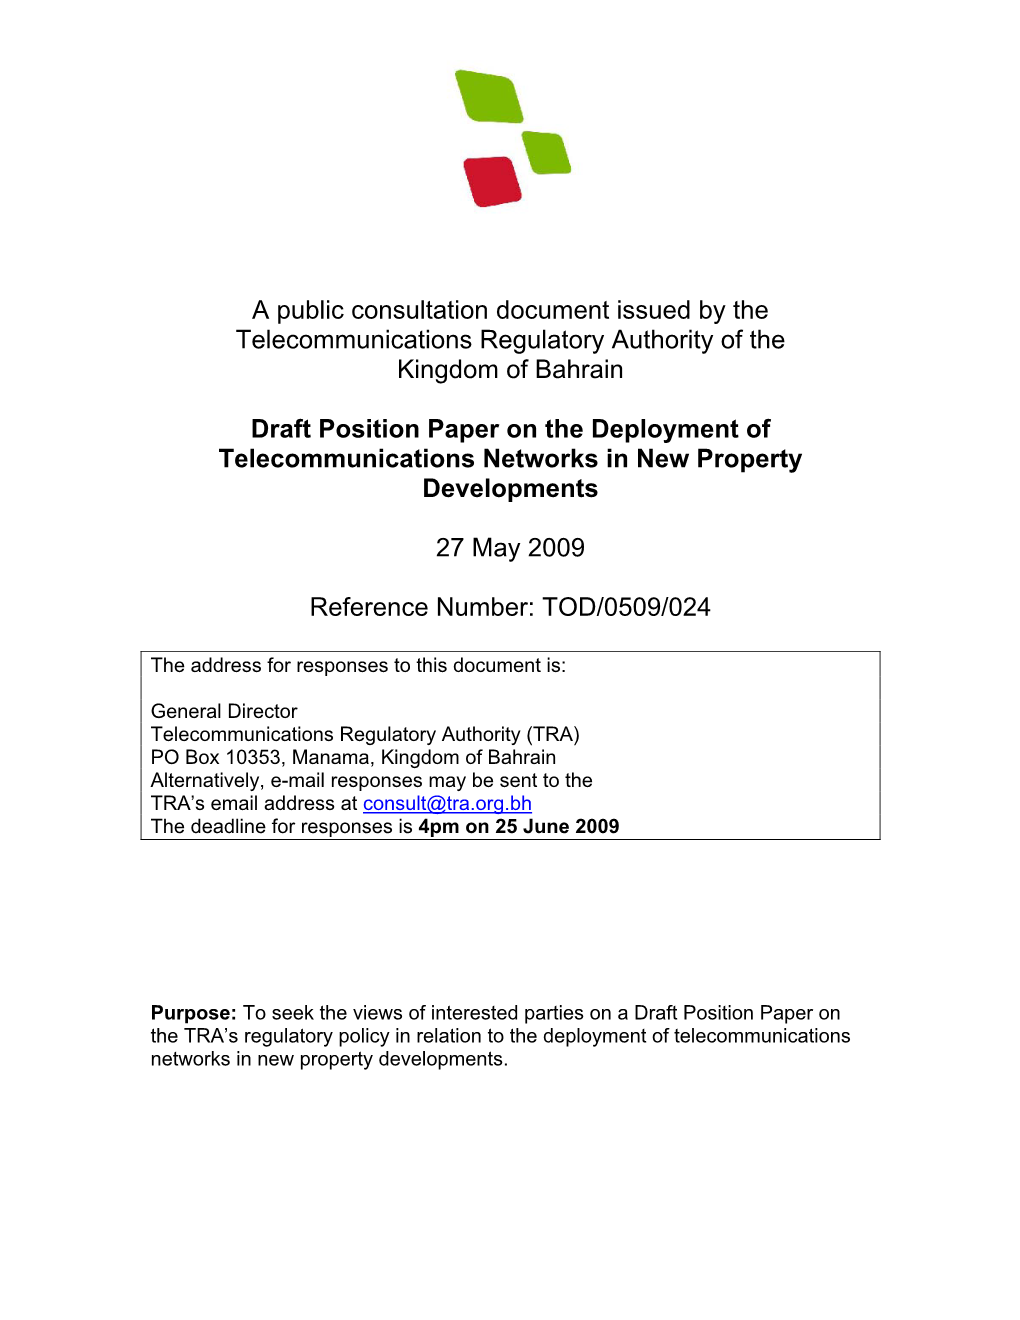 A Public Consultation Document Issued by the Telecommunications Regulatory Authority of the Kingdom of Bahrain